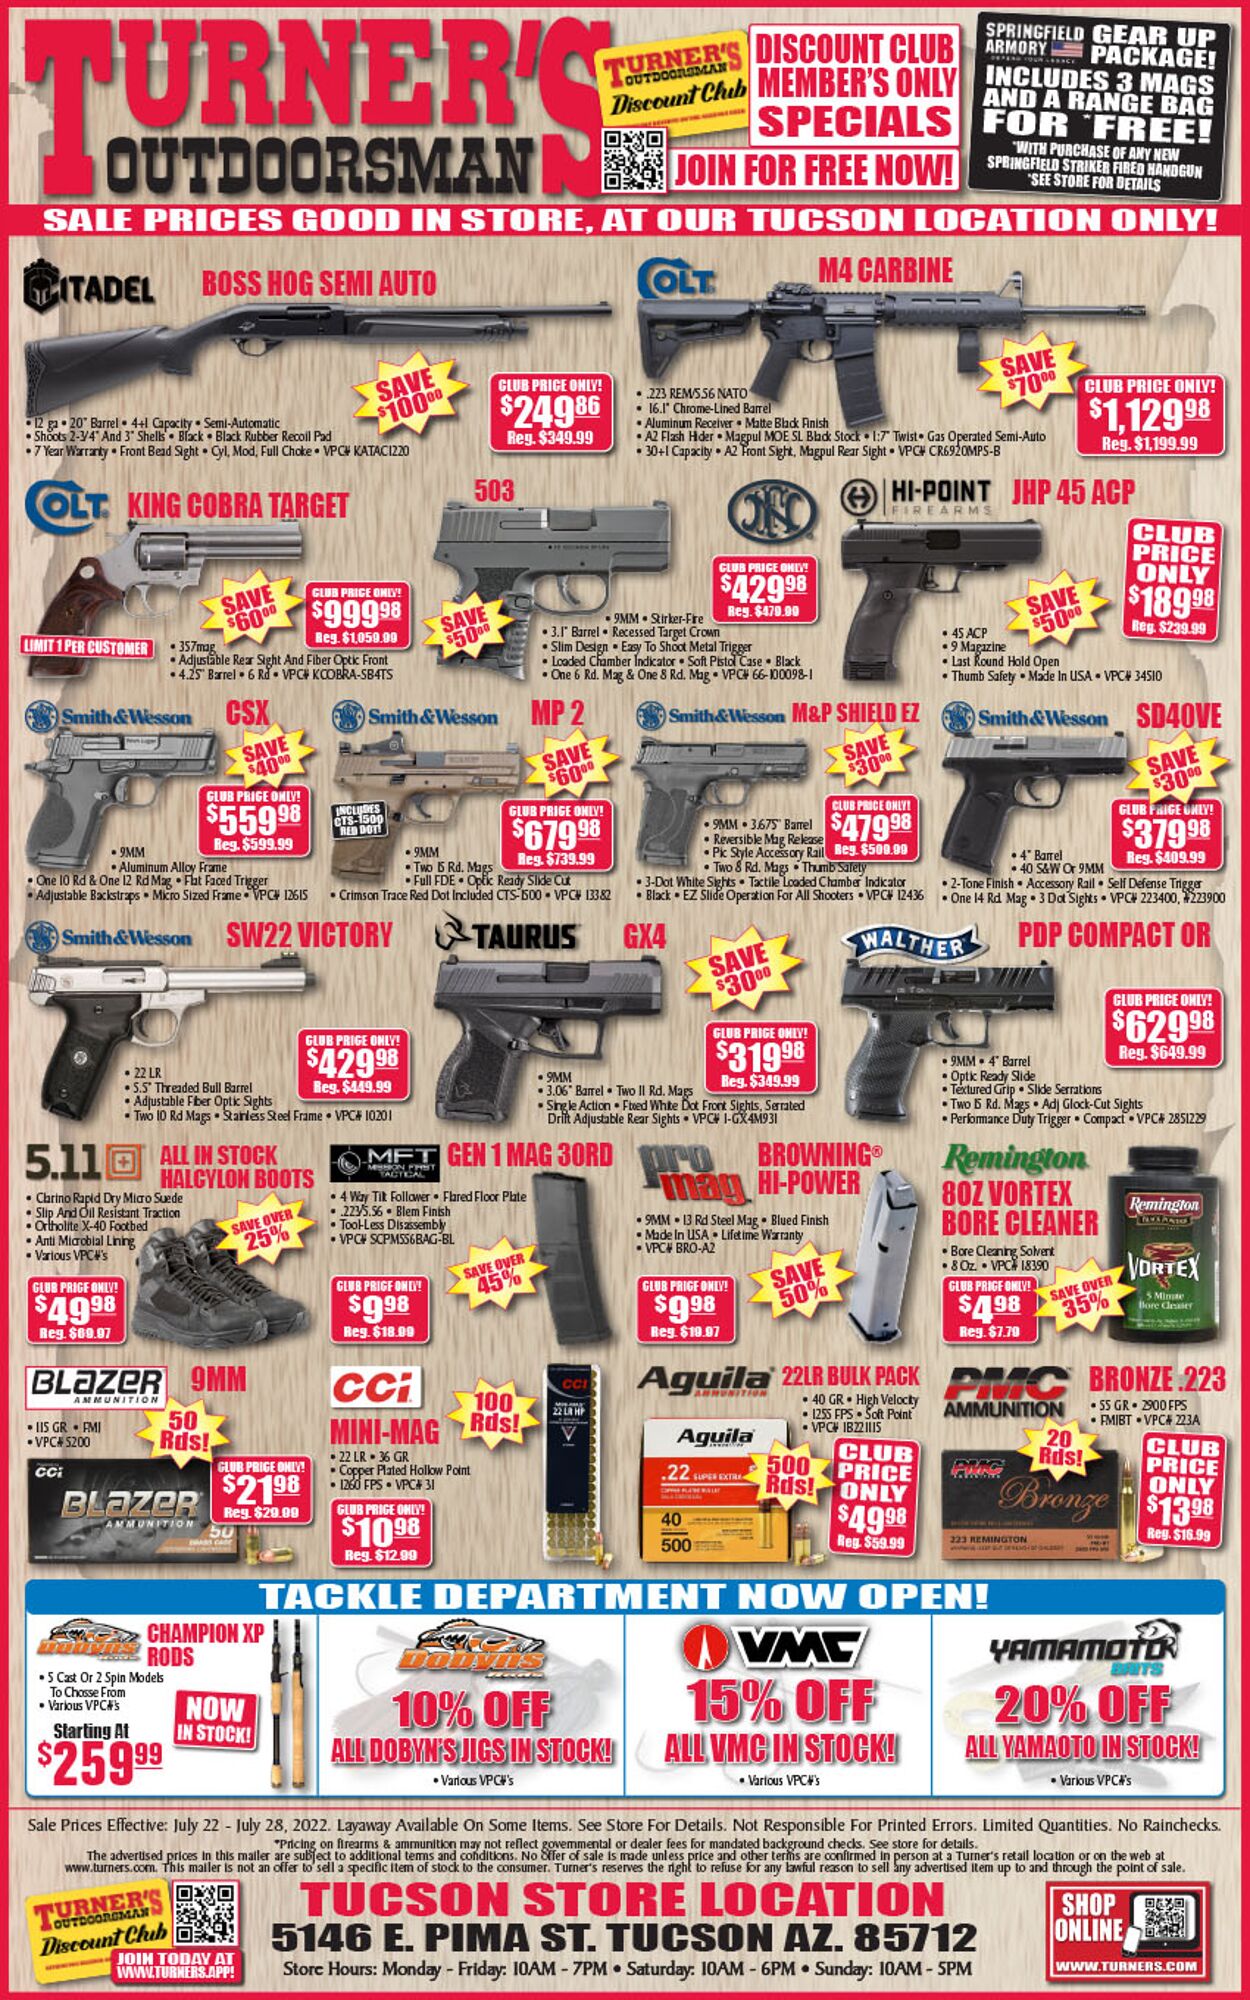 Weekly ad Turner's Outdoorsman 07/22/2022-07/28/2022